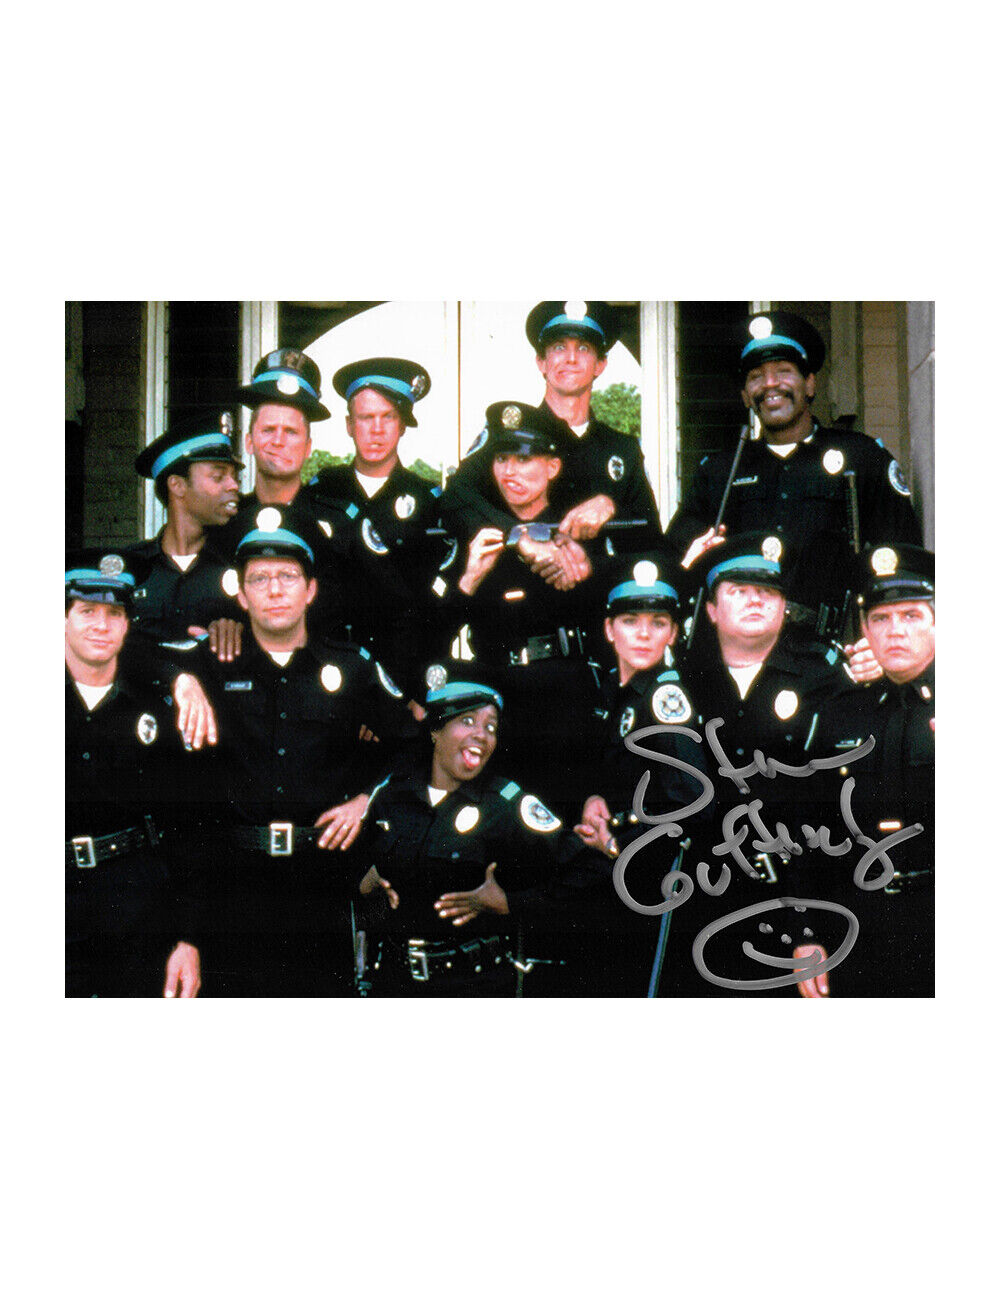 Police Academy Print Signed by Steve Guttenberg 100% Authentic With COA